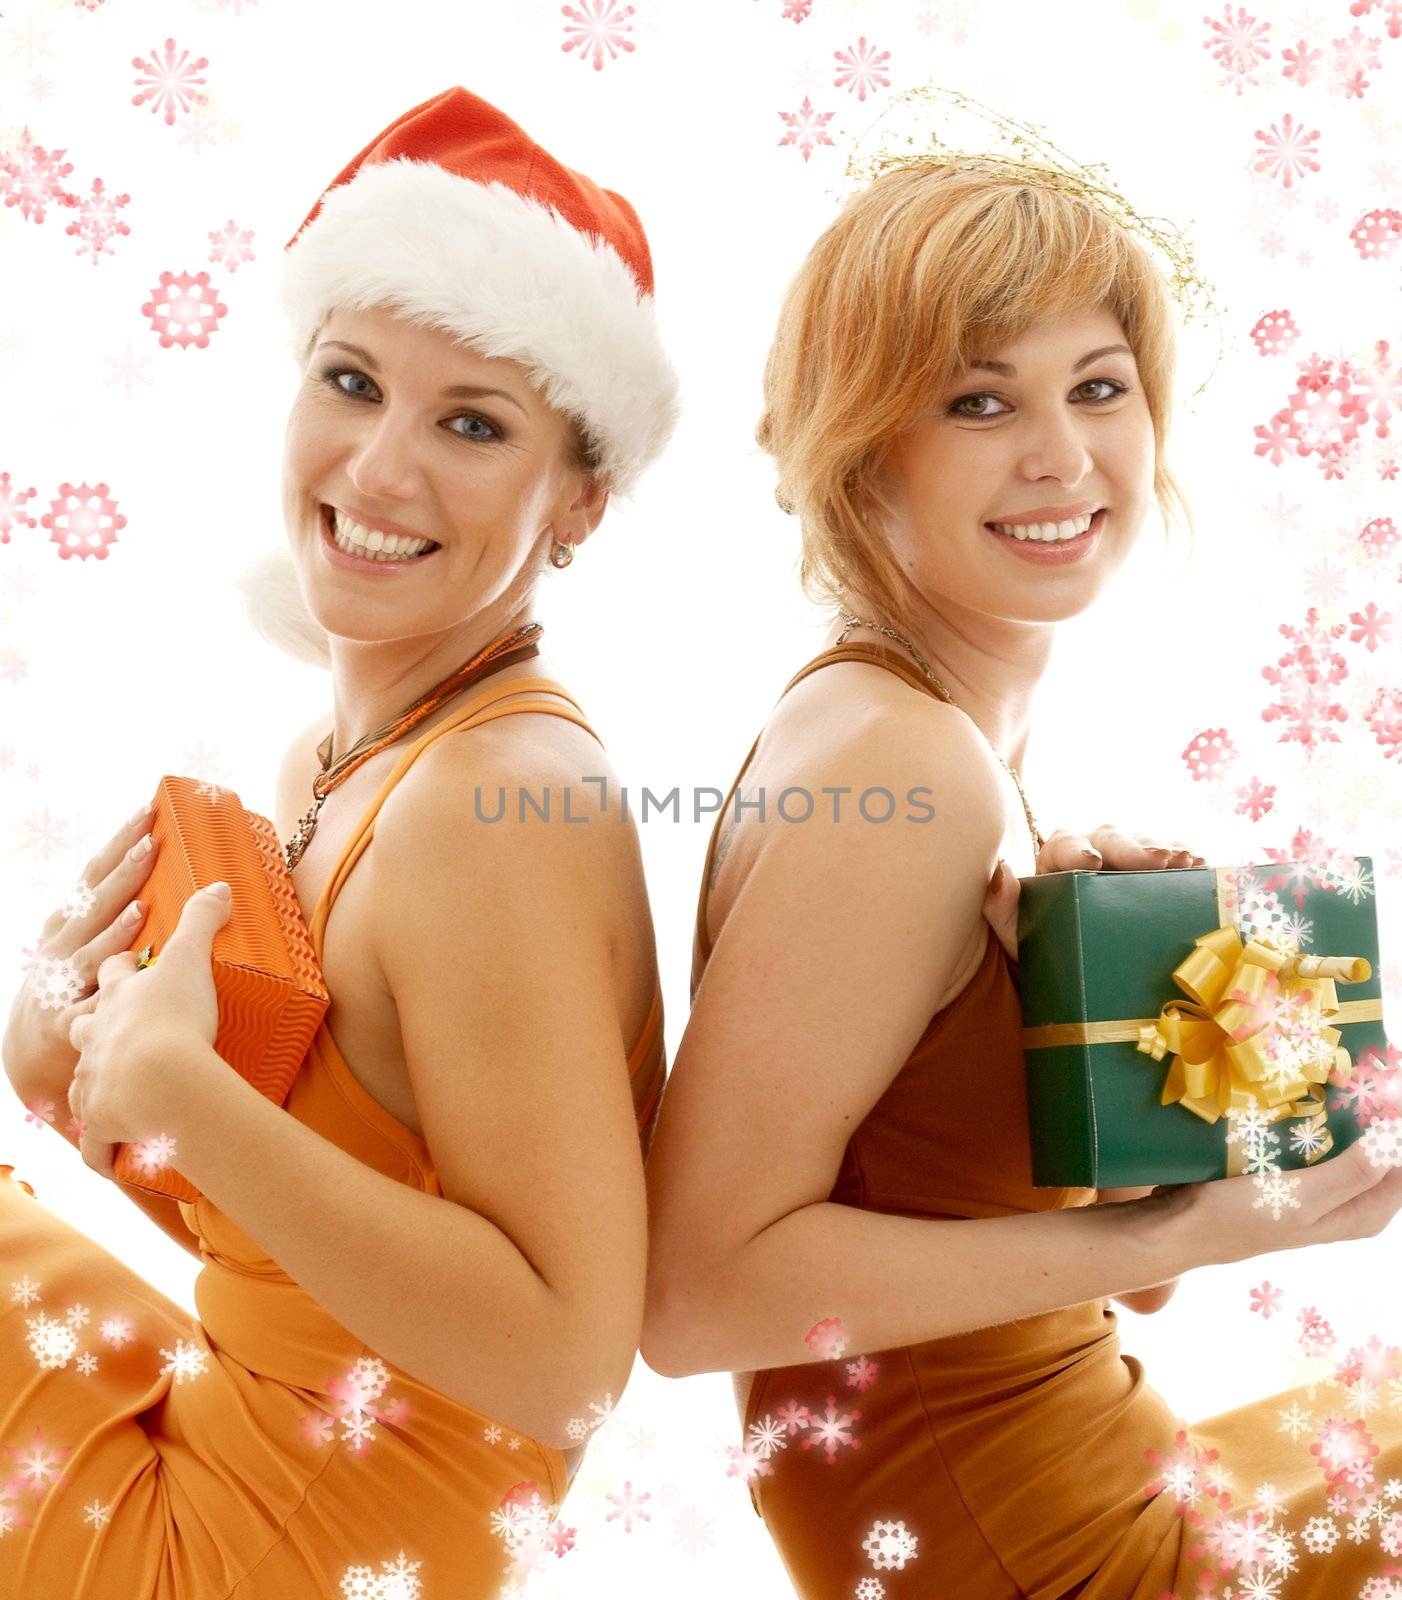 tho beauties celebrating christmas surrounded by rendered snowflakes